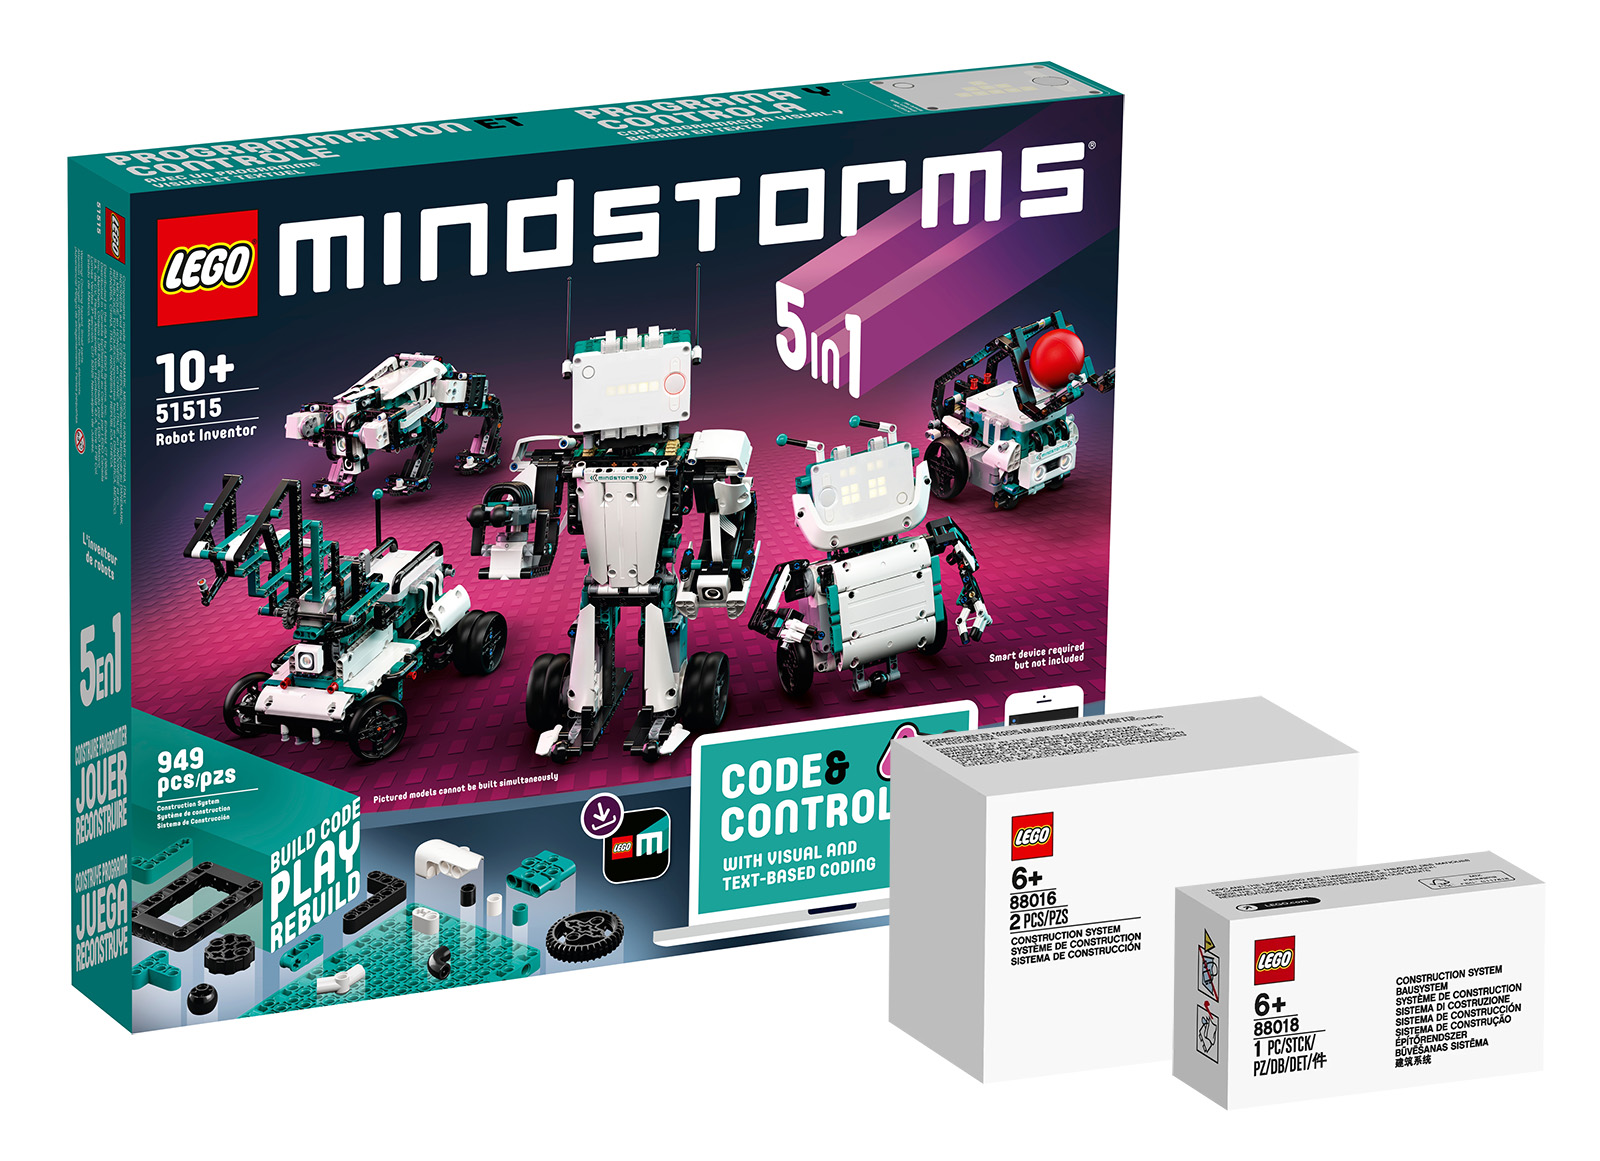 End Of An Era, As LEGO To Discontinue Mindstorms